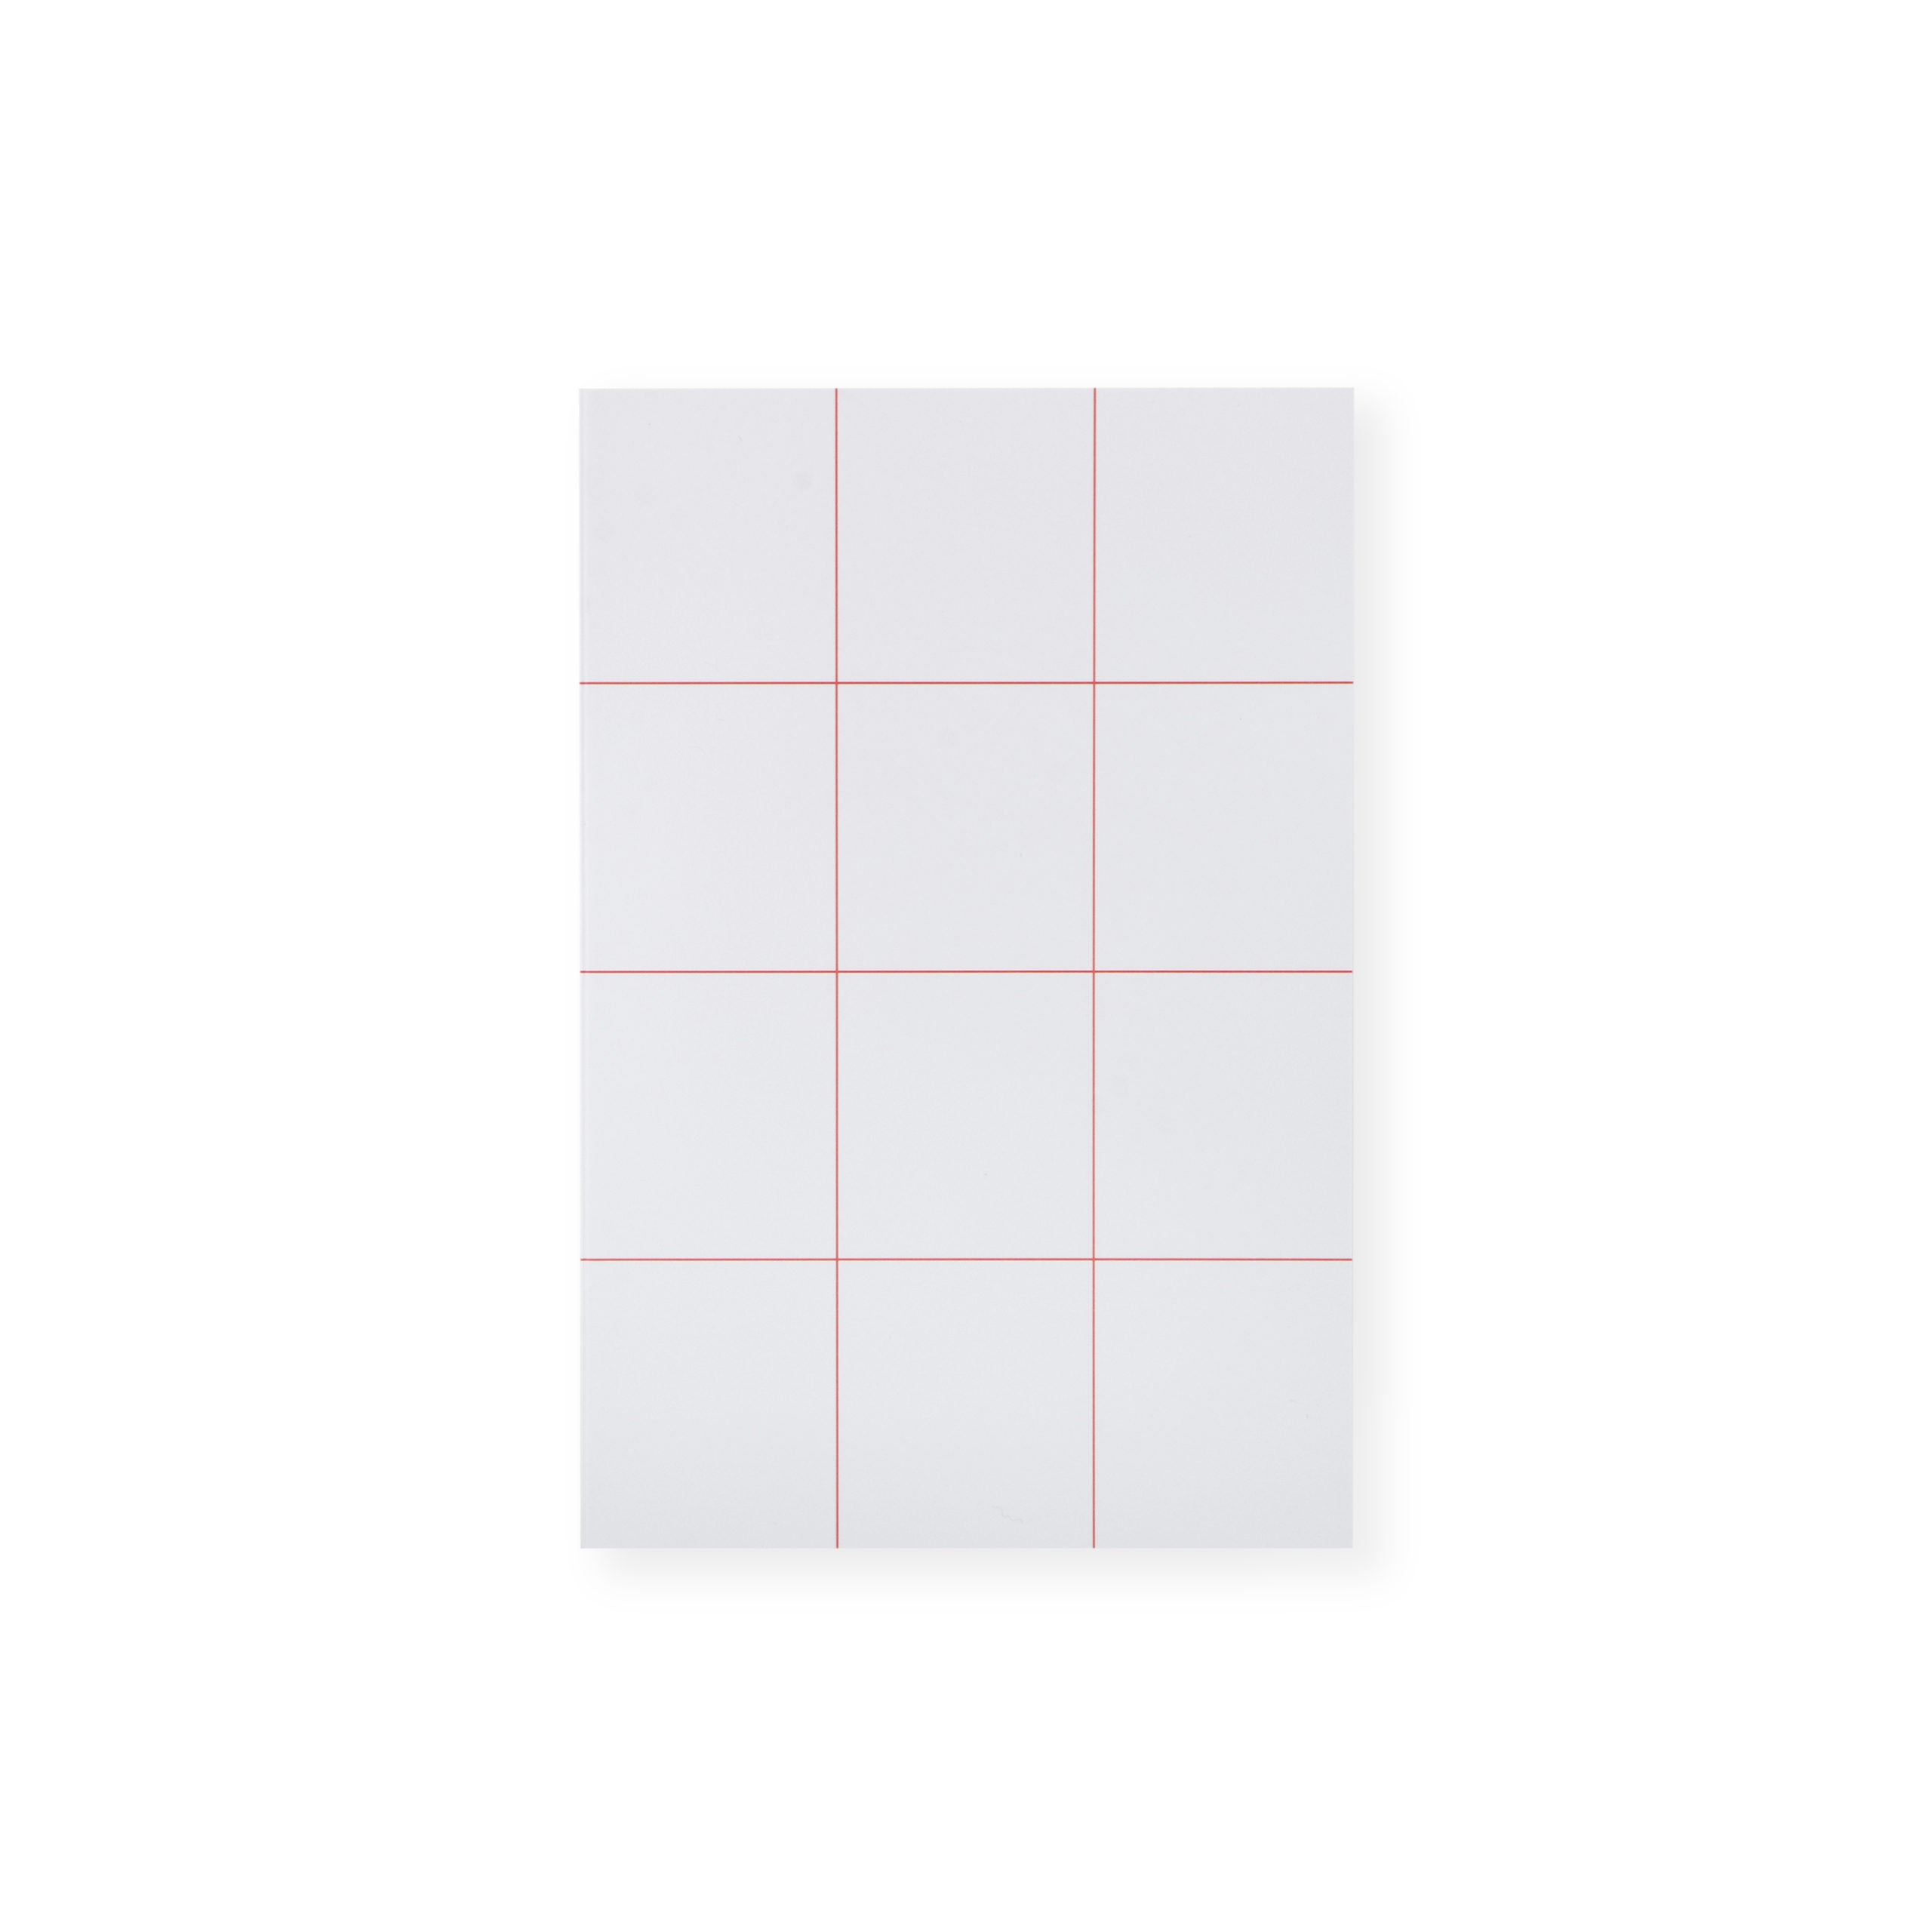 Square red lined paper notebook